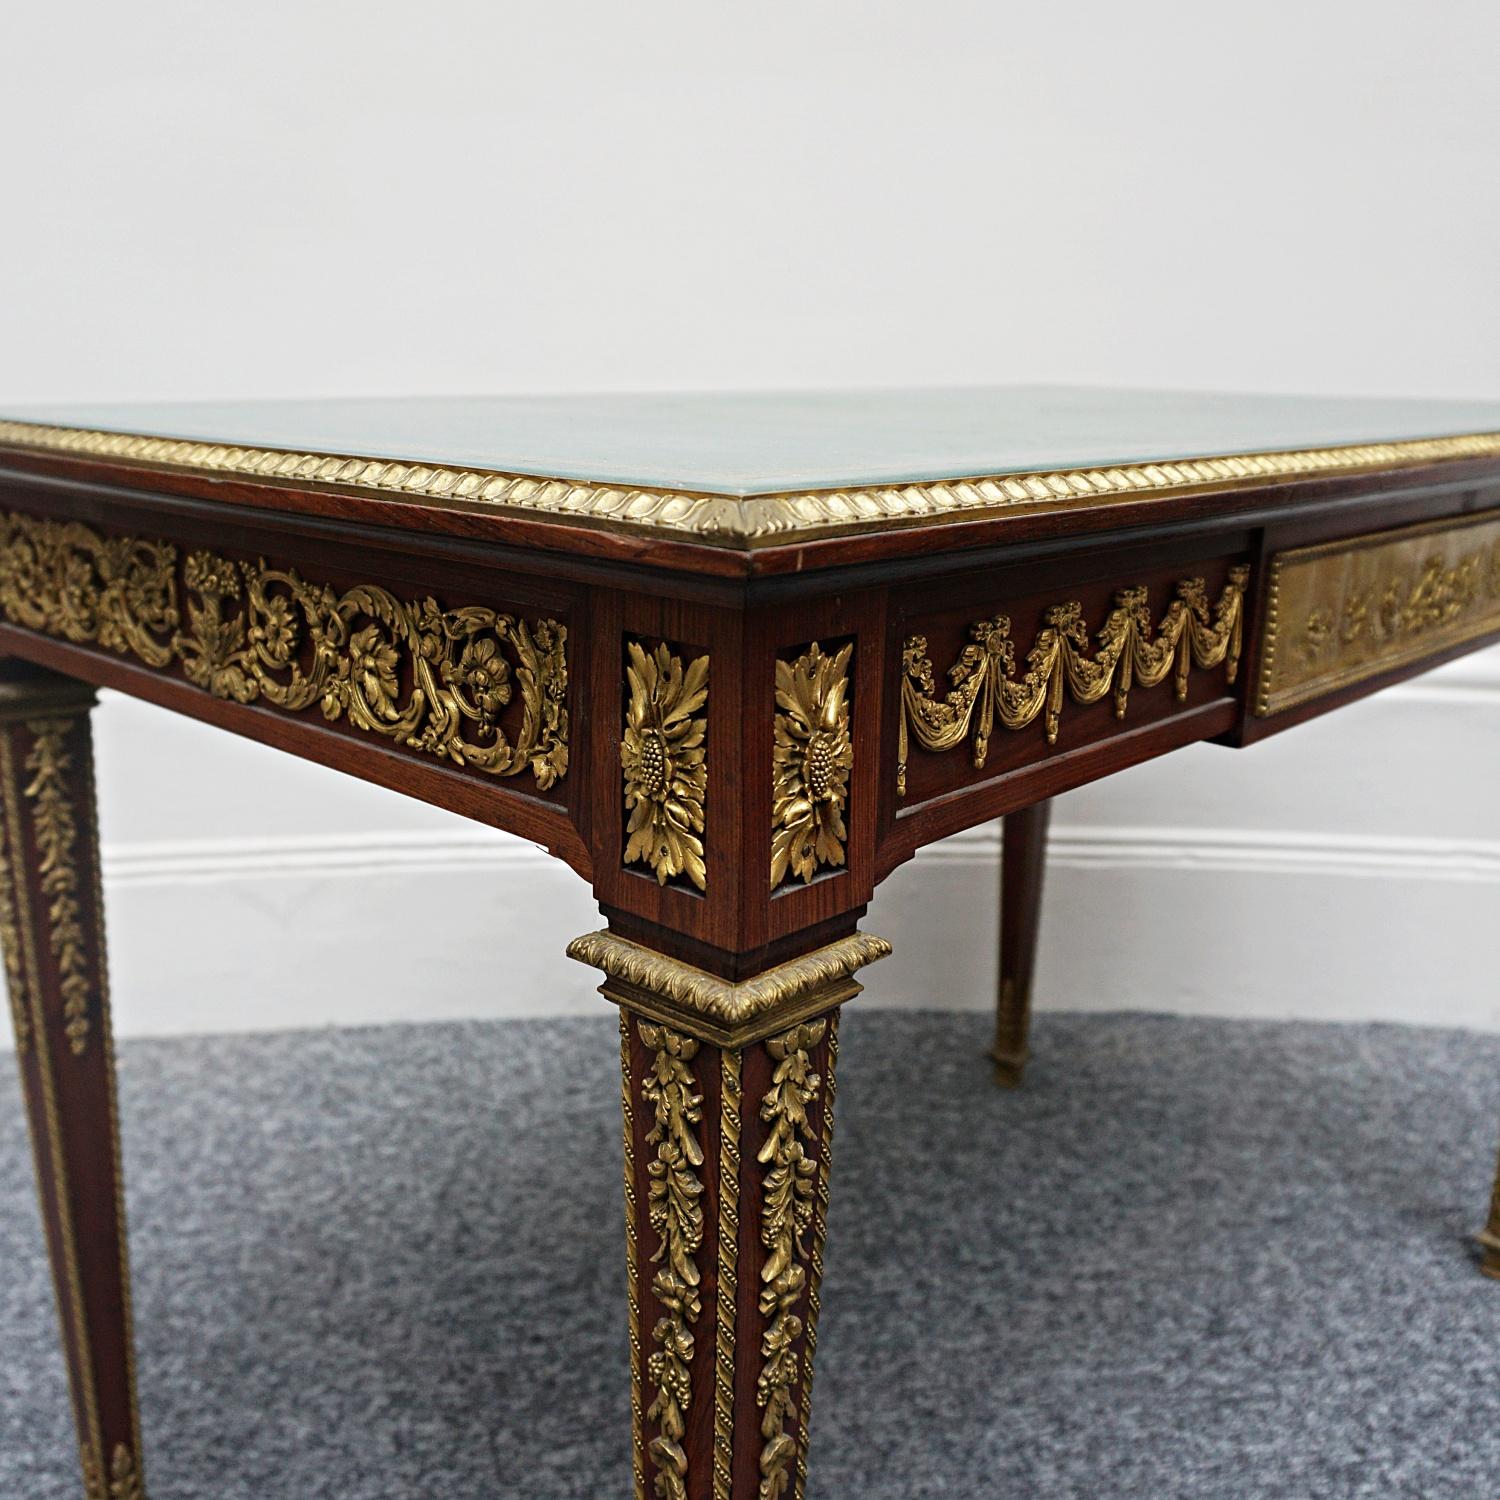 Louis XVI Style Gilt-Bronze Mounted Kingwood Writing Table by Francois Linke For Sale 9